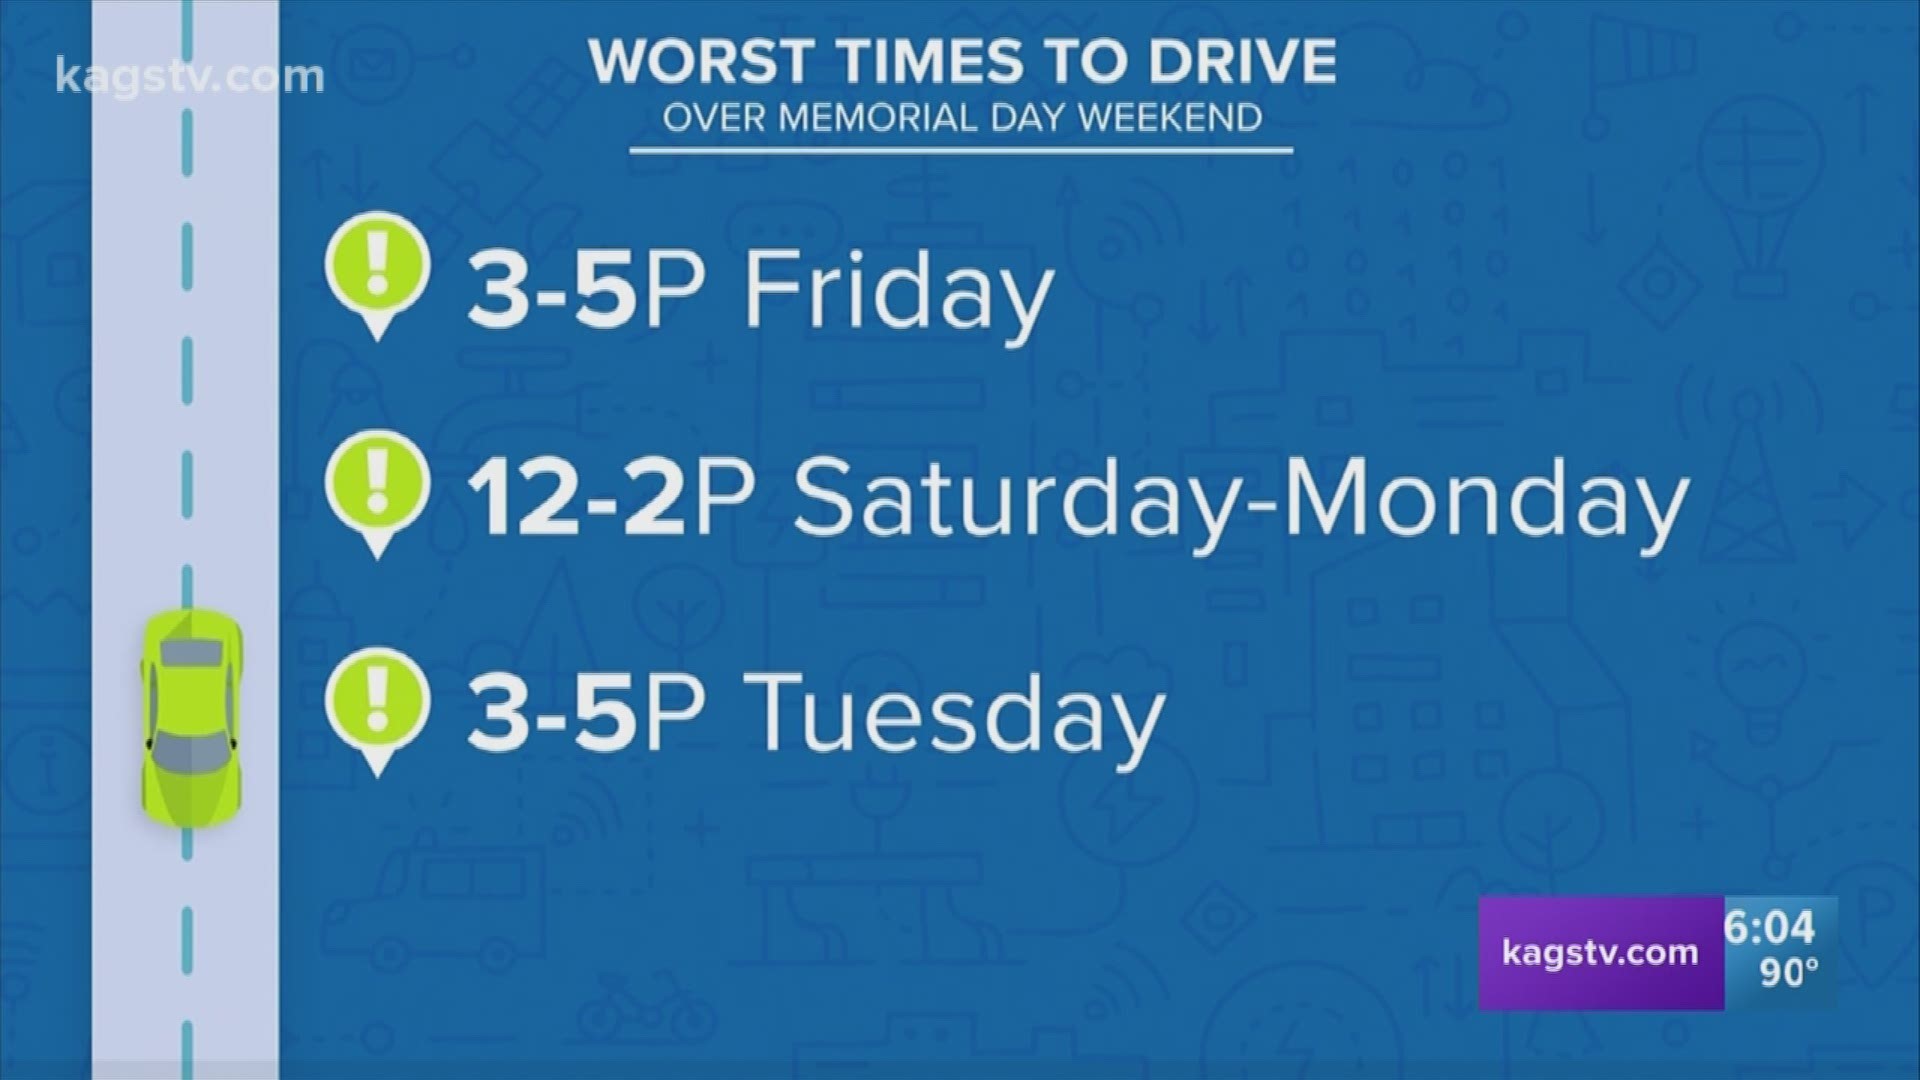 With the start of summer arriving, a lot of you will be taking to the roads this weekend. Here are the worst times to drive during Memorial weekend on average across the U.S.